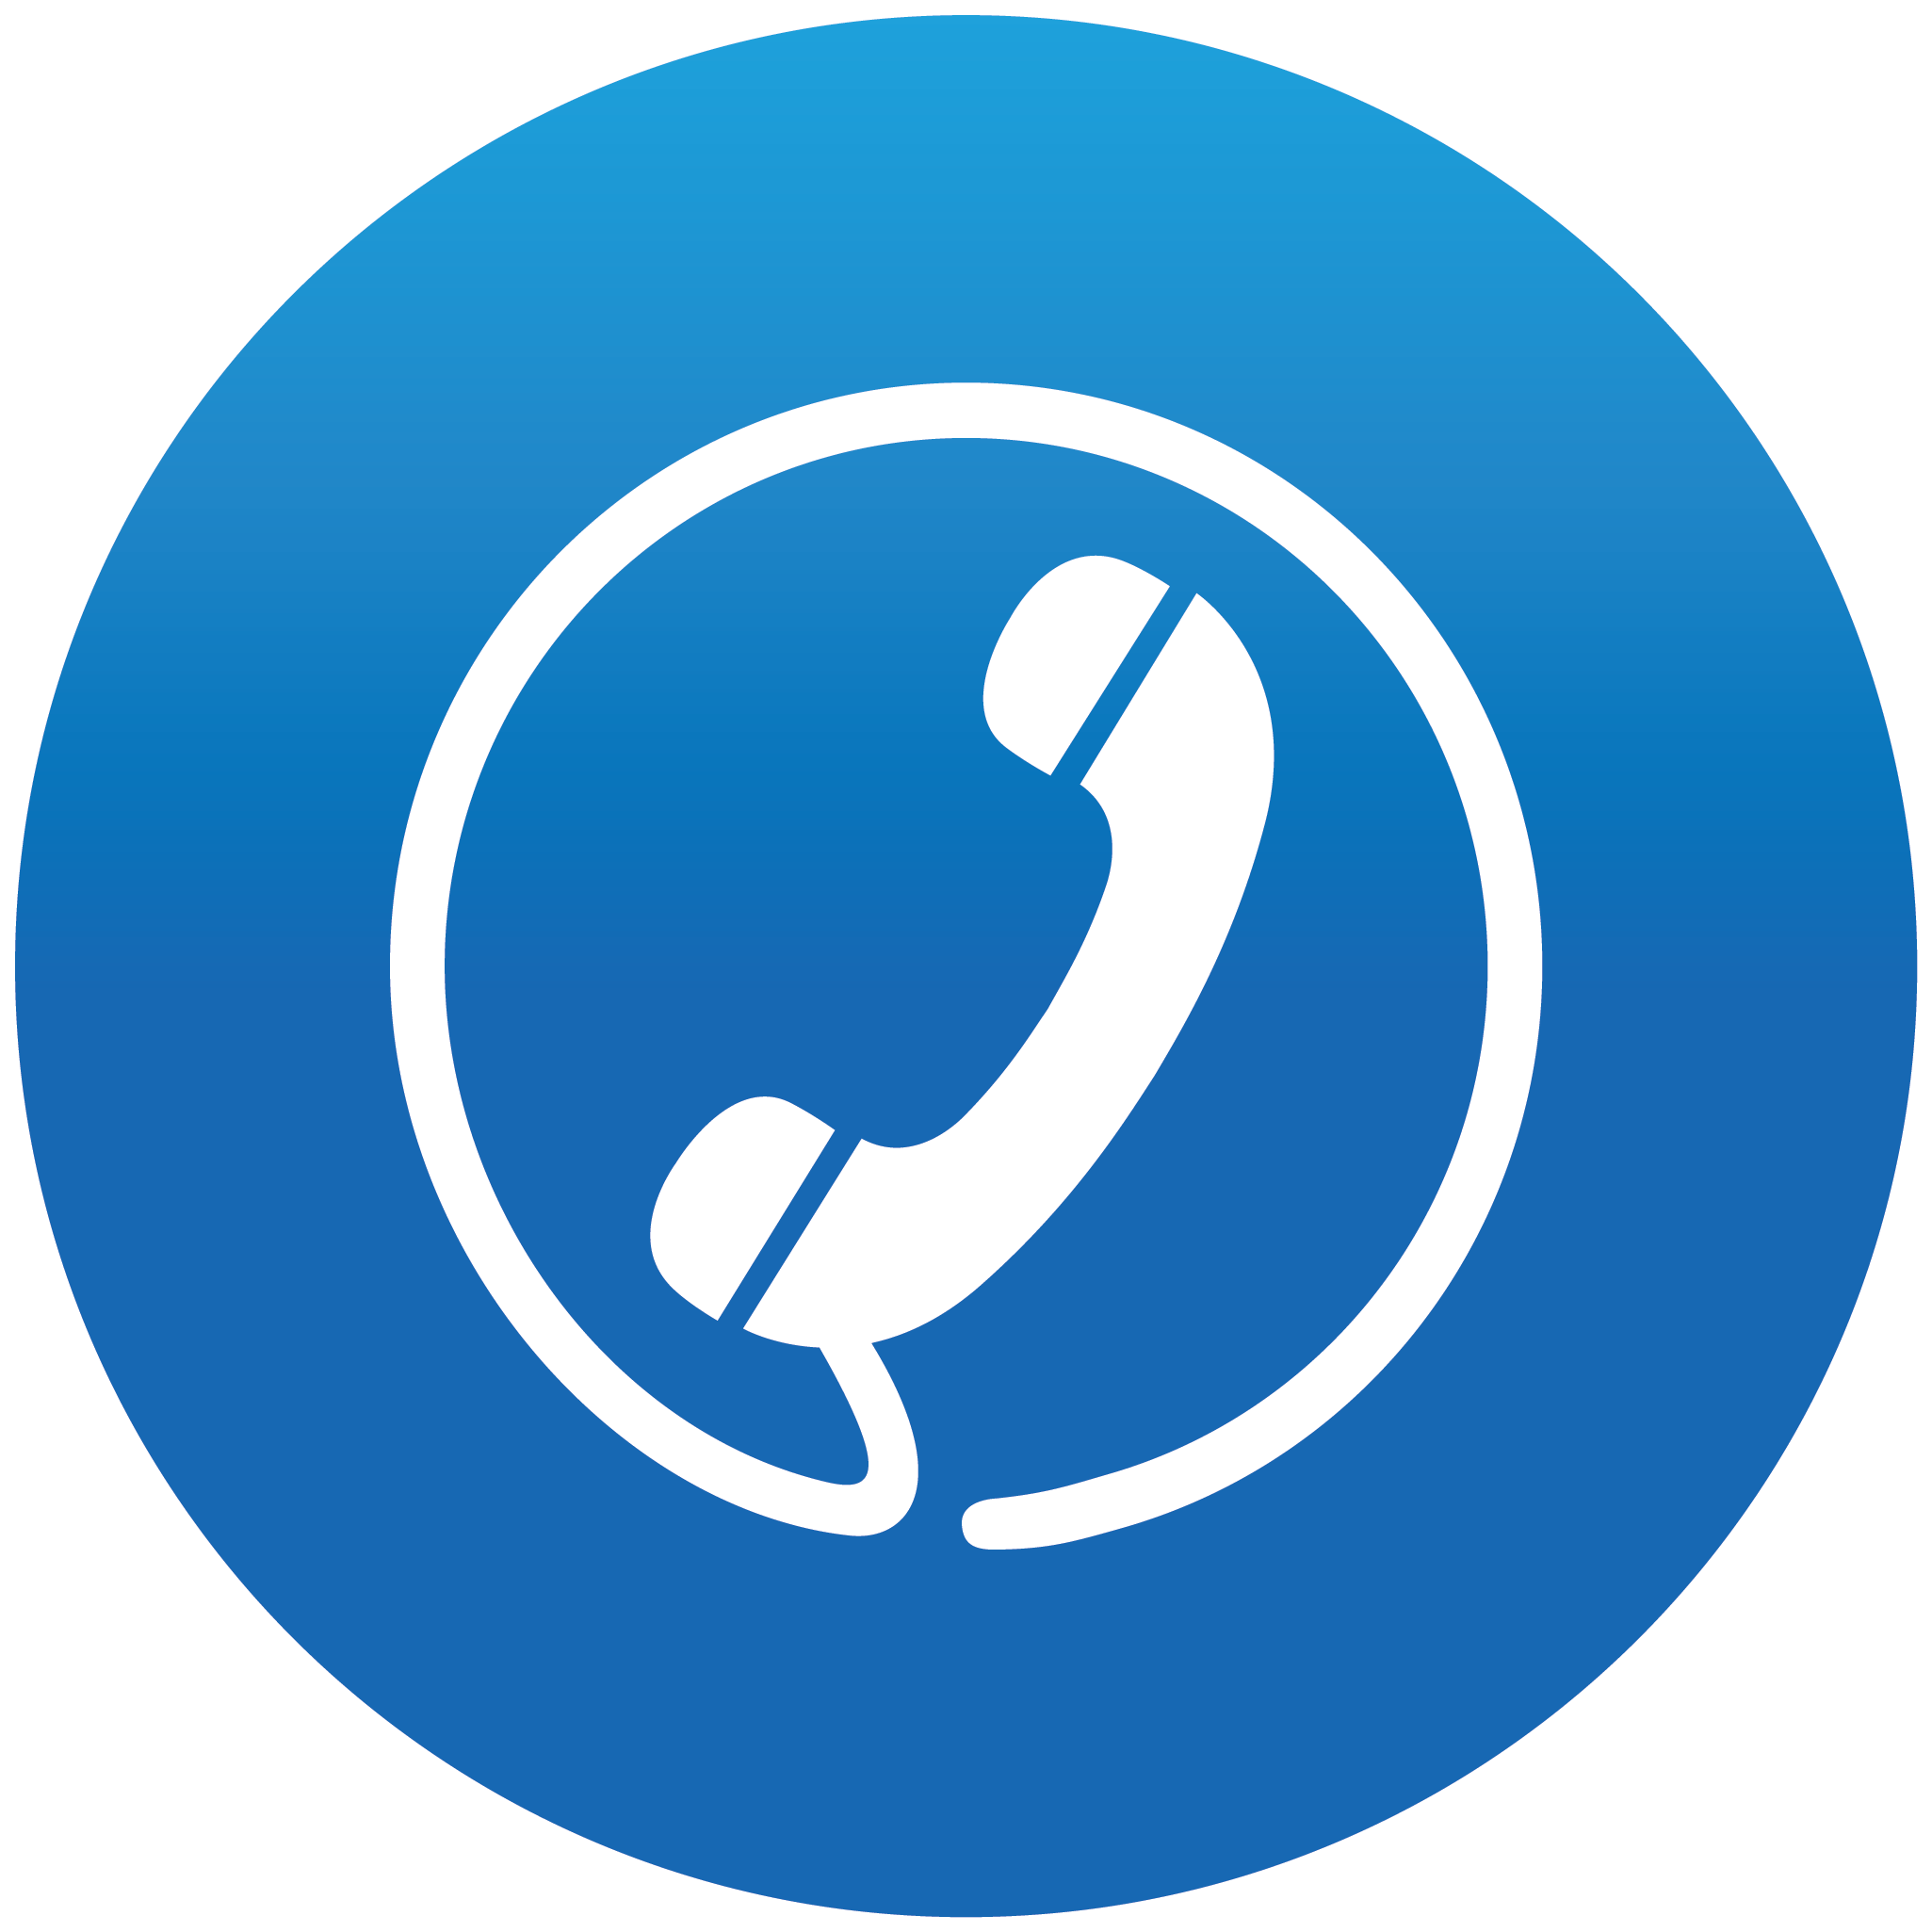 Free Telephone PNG Transparent Images, Download Free Telephone PNG Transpar...